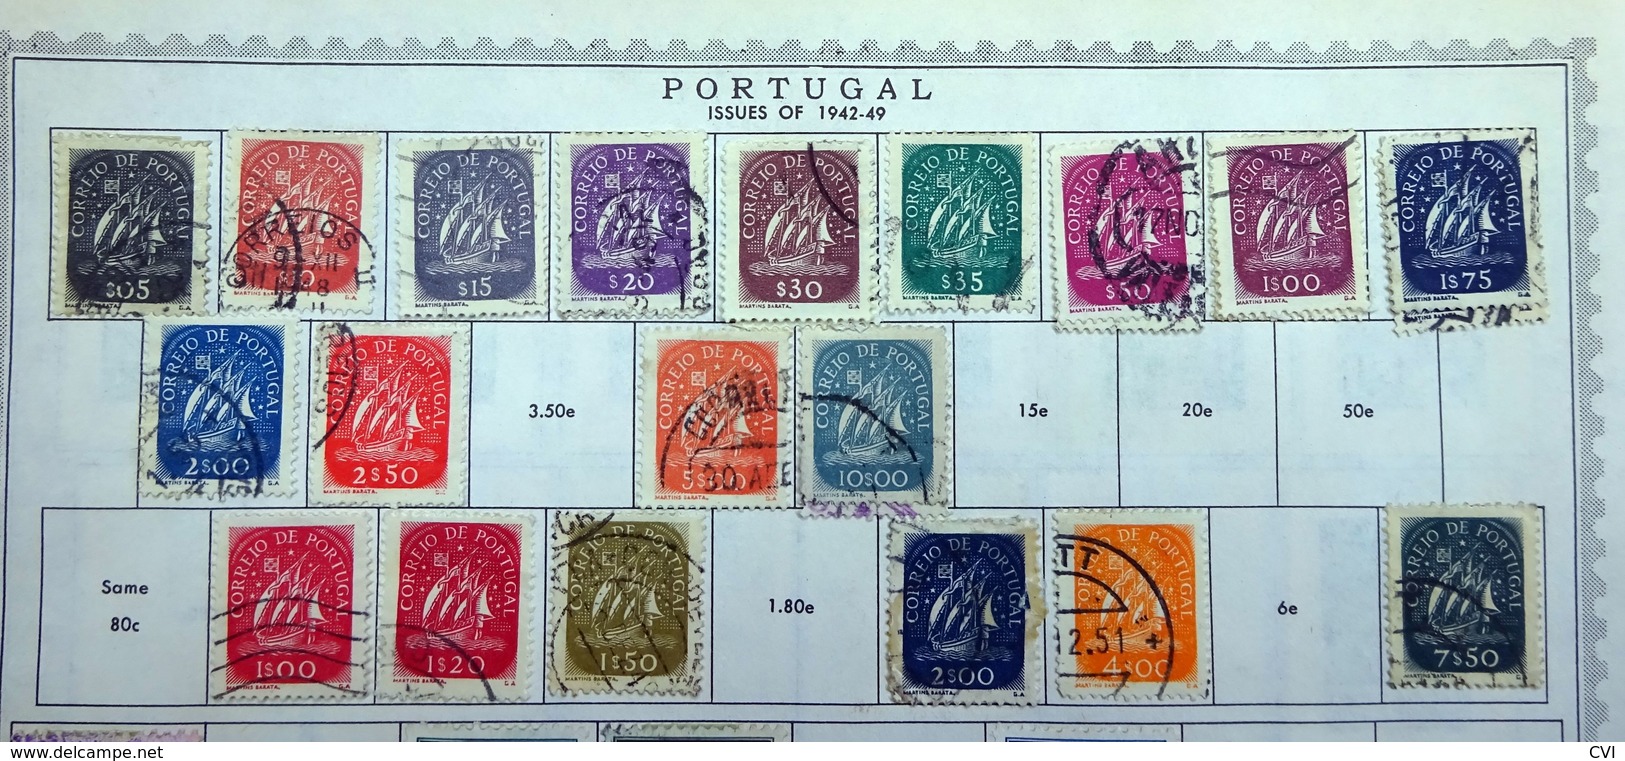 Portugal Early to 1960's Selection on Pages, Mint/Used, Sets, etc.